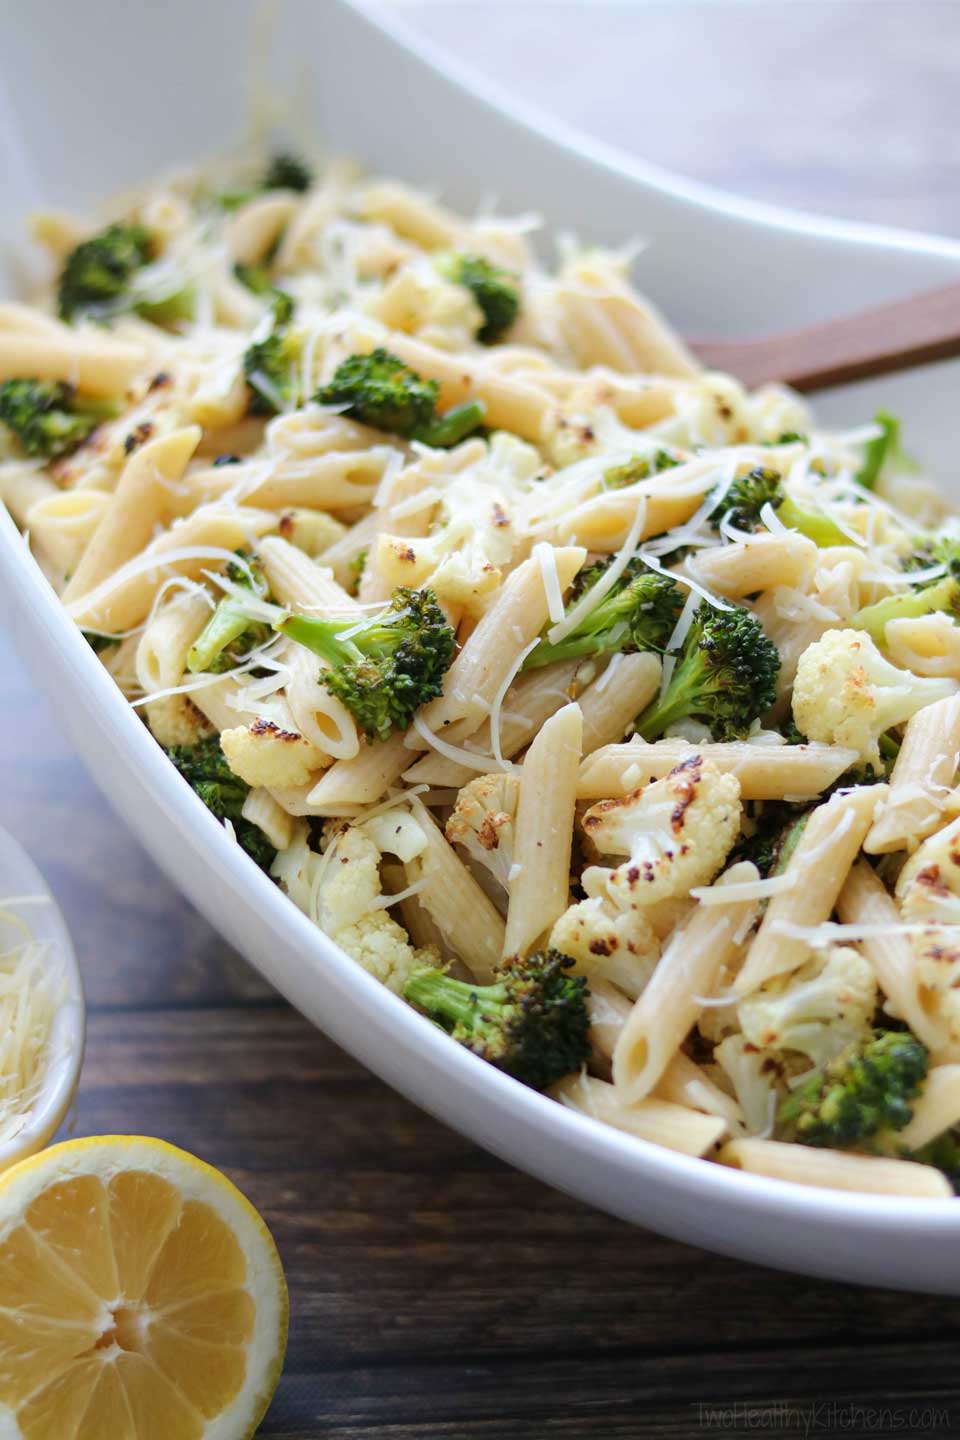 This Broccoli and Cauliflower Pasta gets big flavors from the oven-roasted vegetables, plus the simple additions of garlic, lemon juice and parmesan cheese. Such an easy dinner recipe, yet so deliciously satisfying! A great vegetarian meal with so much flavor that you’ll never miss the meat!